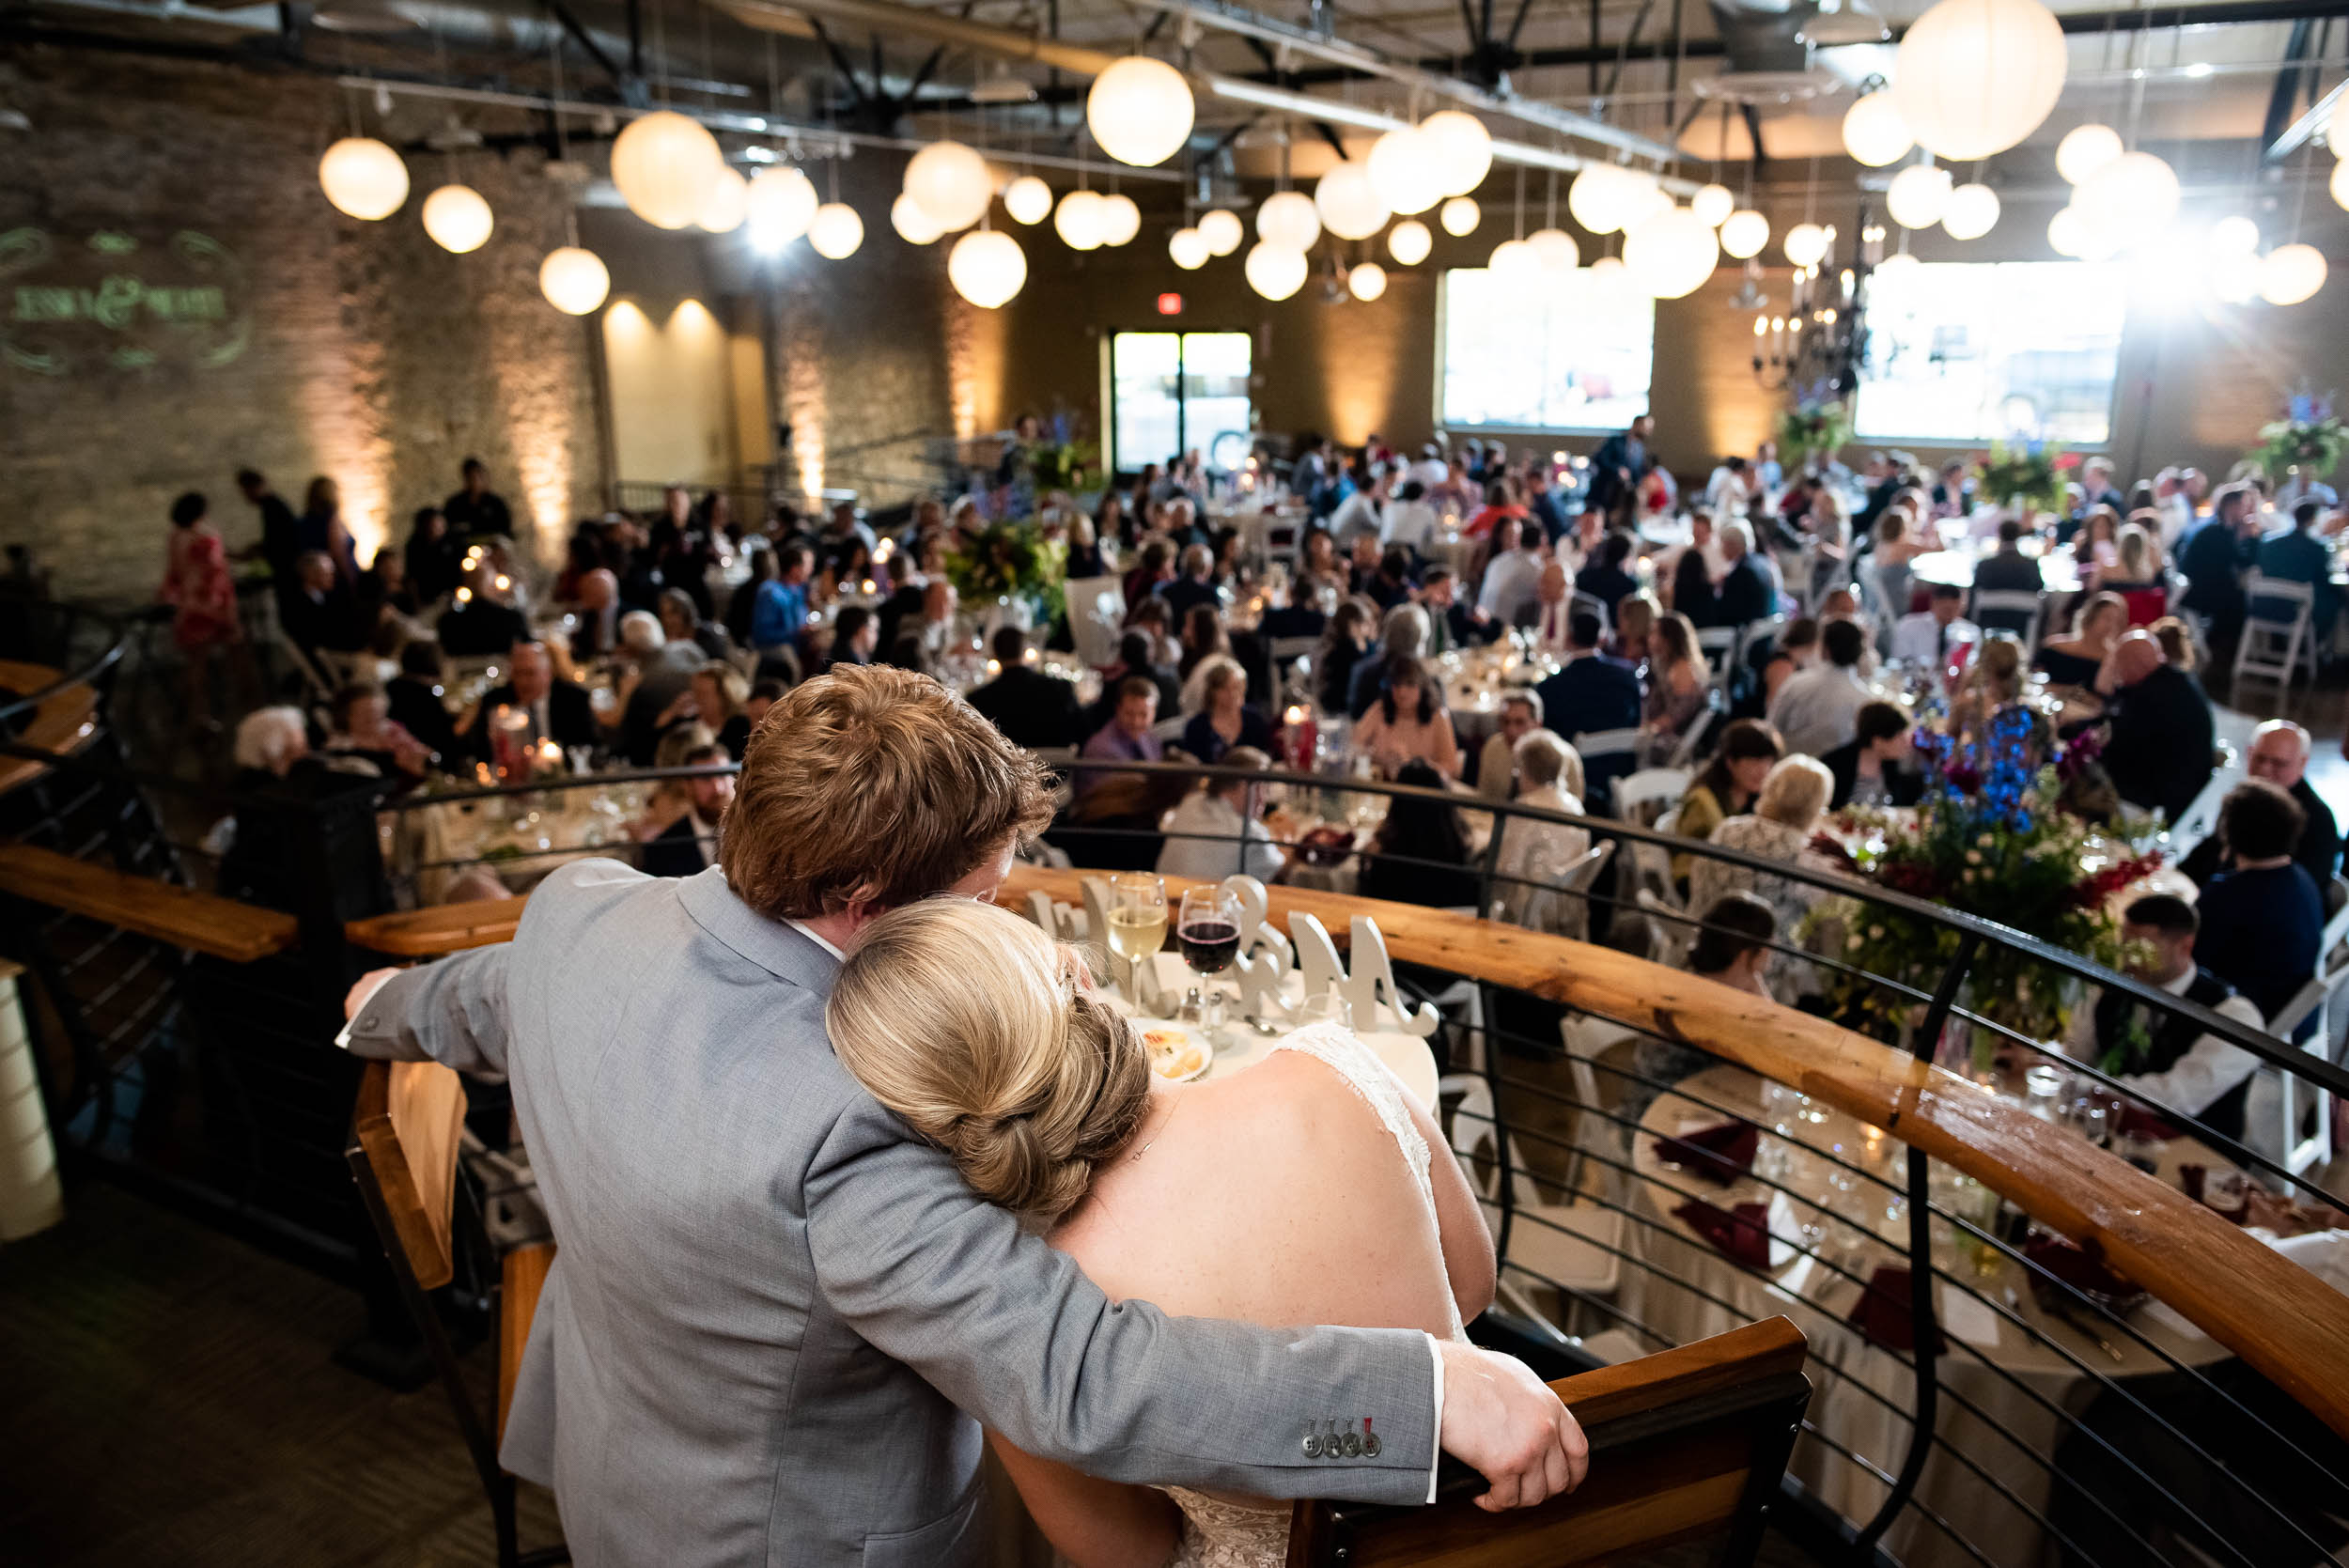 Brewhouse wedding venue: Modern industrial Chicago wedding inside Prairie Street Brewhouse captured by J. Brown Photography. Find more wedding ideas at jbrownphotography.com!